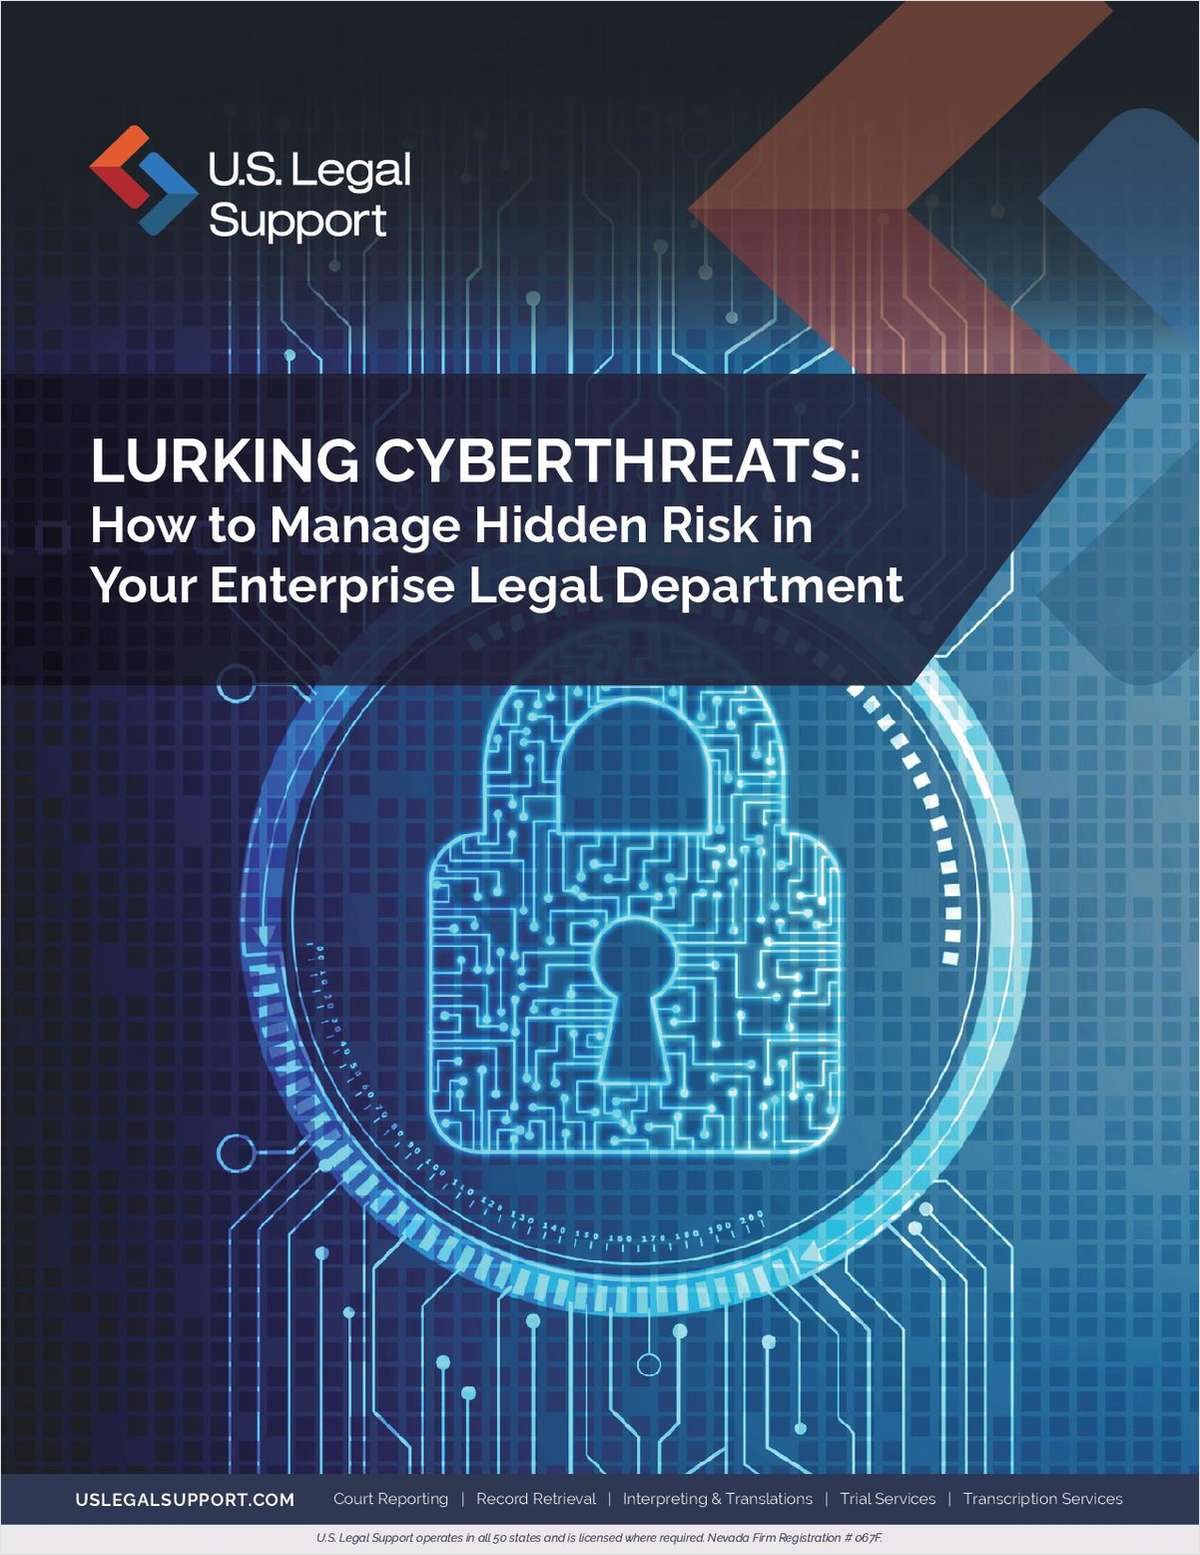 Despite strengthening security strategies, many enterprises and firms overlook a critical risk with surprising frequency -- third- and fourth-party vendors. Download this white paper and learn how to close these gaps in your cybersecurity strategy.